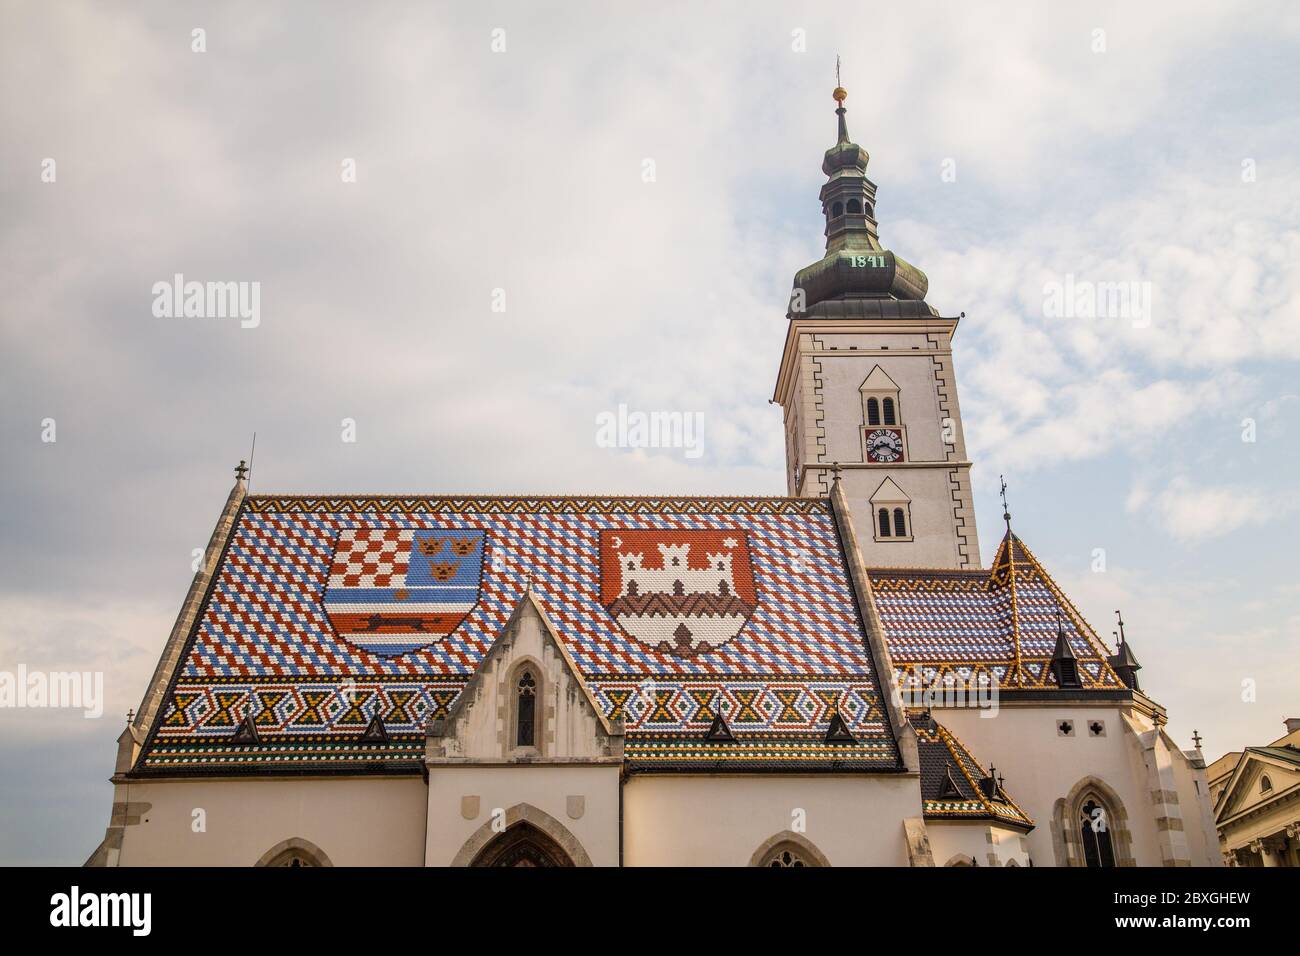 ZAGREB, CROATIA - 17TH AUGUST 2016: A closeup to the roof of St Marks Church in central Zagreb, Croatia during the day. Stock Photo